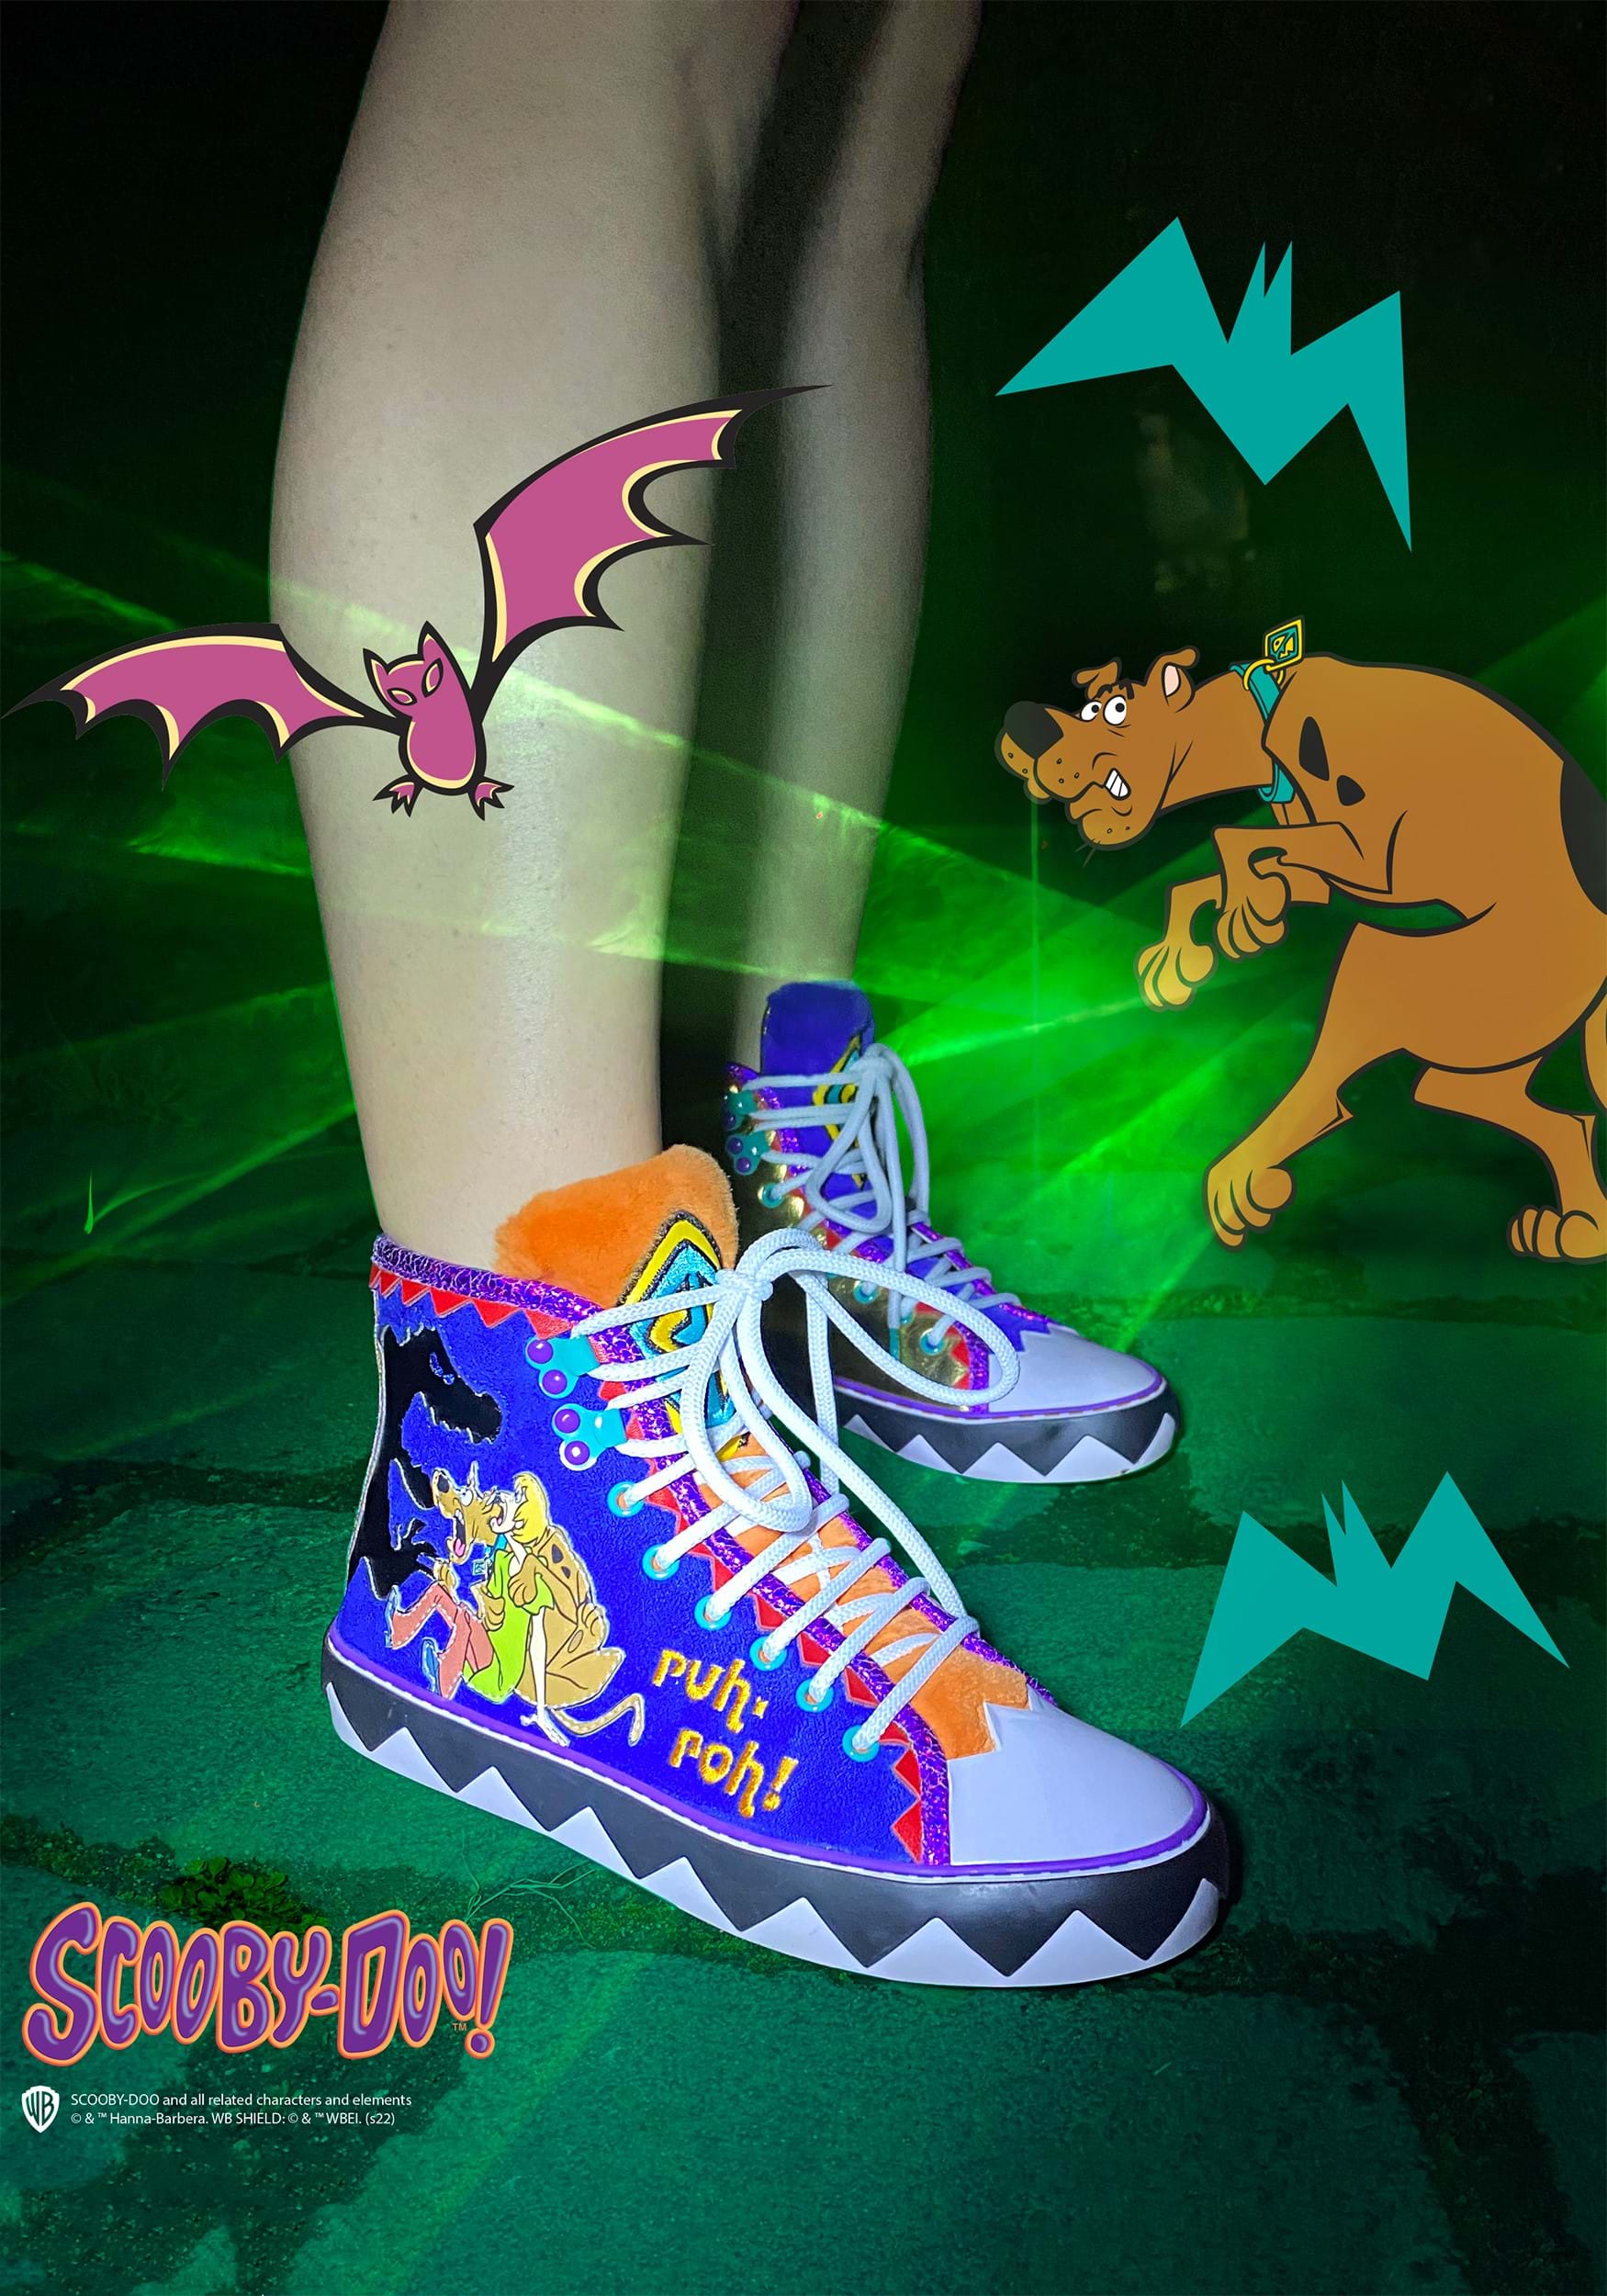 https://images.halloweencostumes.ca/products/89552/1-1/irregular-choice-scooby-doo-zoinks-sneakers.jpg